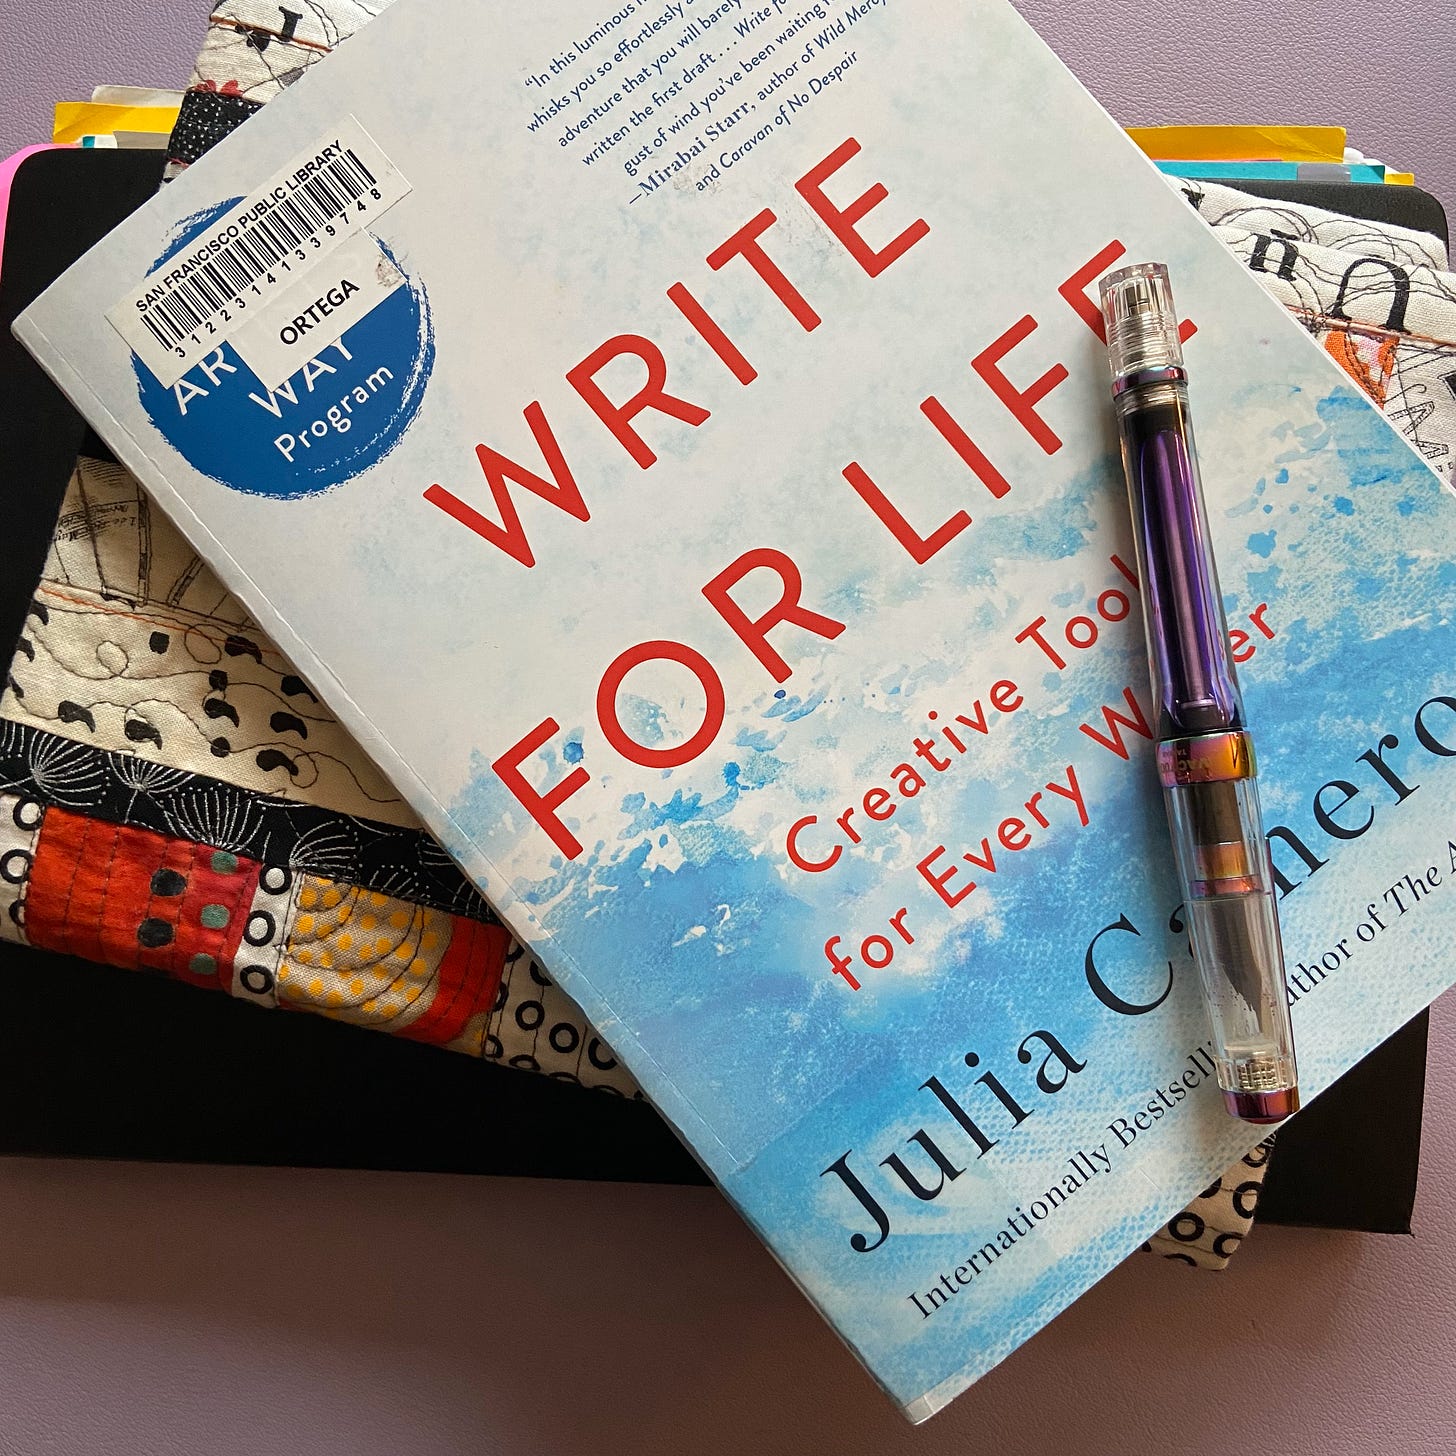 Stack of books showing a journal, a quilted journal cover, and Julia Cameron's Write for Life